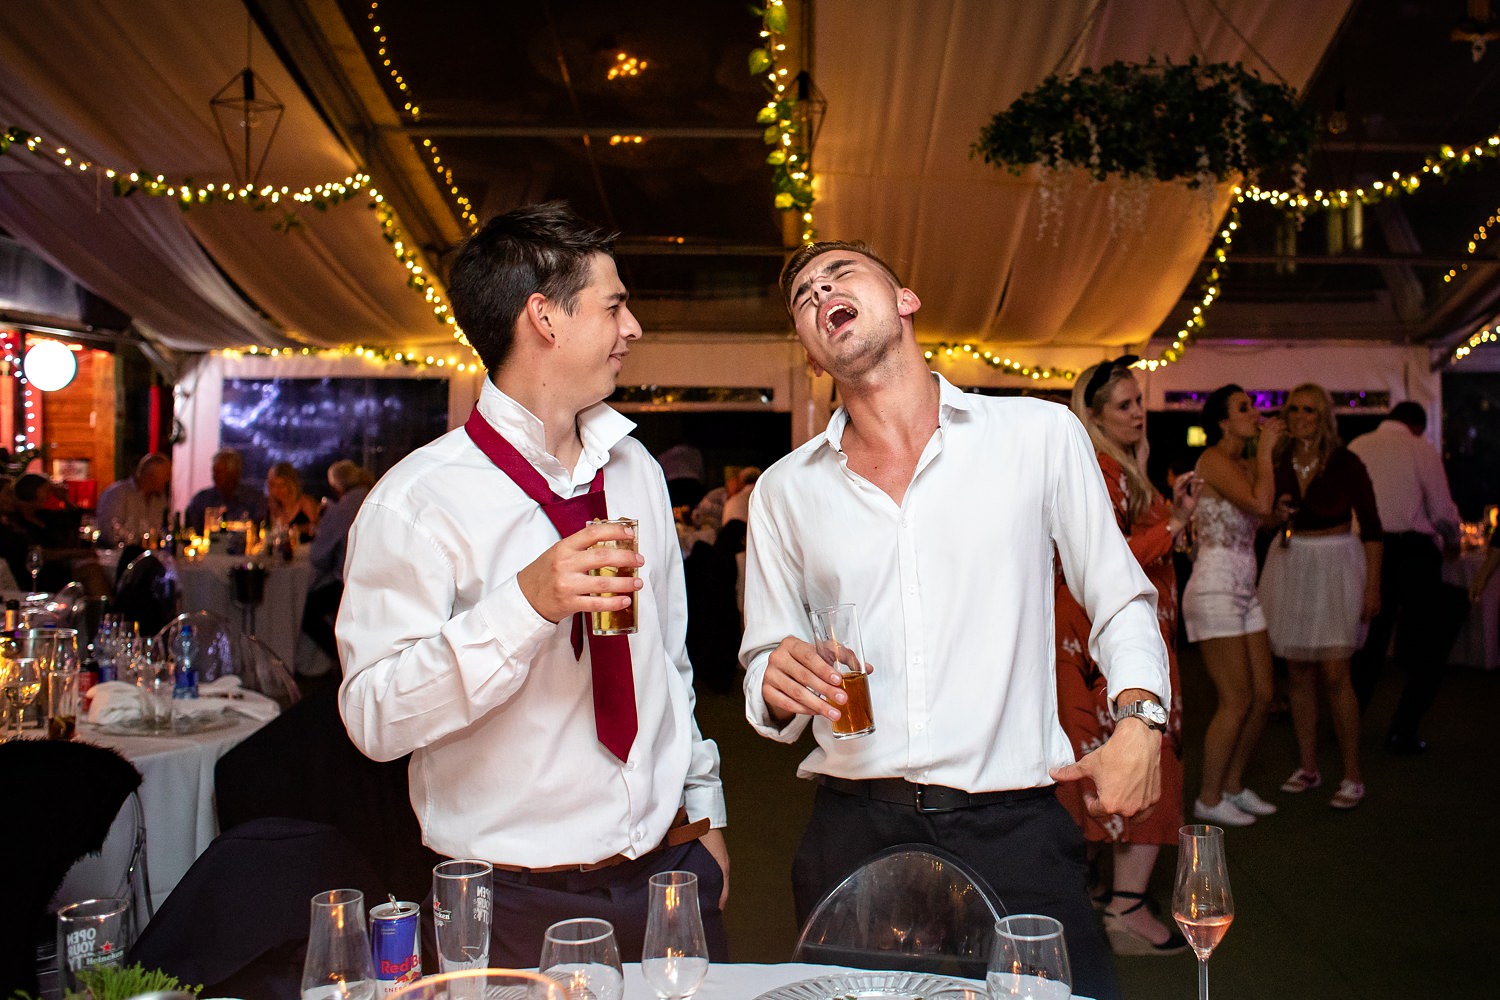 A wedding guest sings loudly whilst another guest looks at him quizzically whilst holding a drink